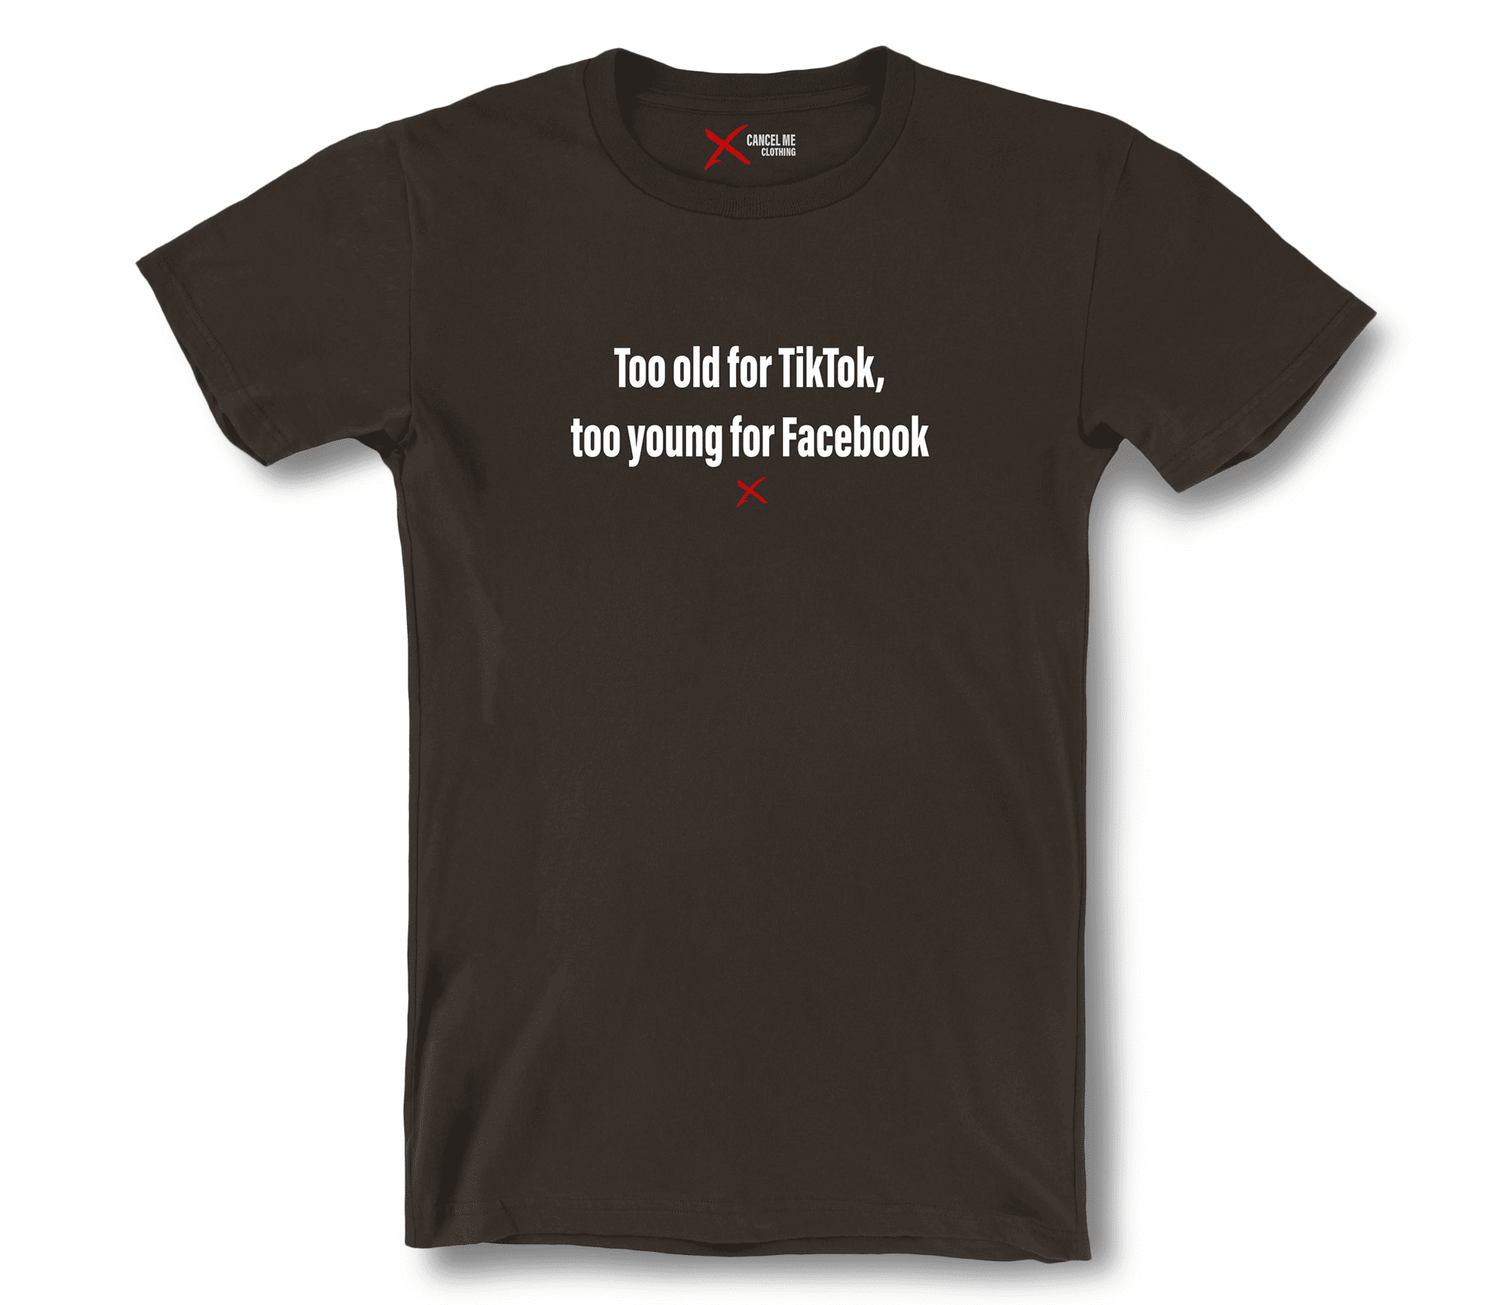 lp-social_media_1-shirt_7791578972330_too-old-for-tiktok-too-young-for-facebook-shirt_Brown.png